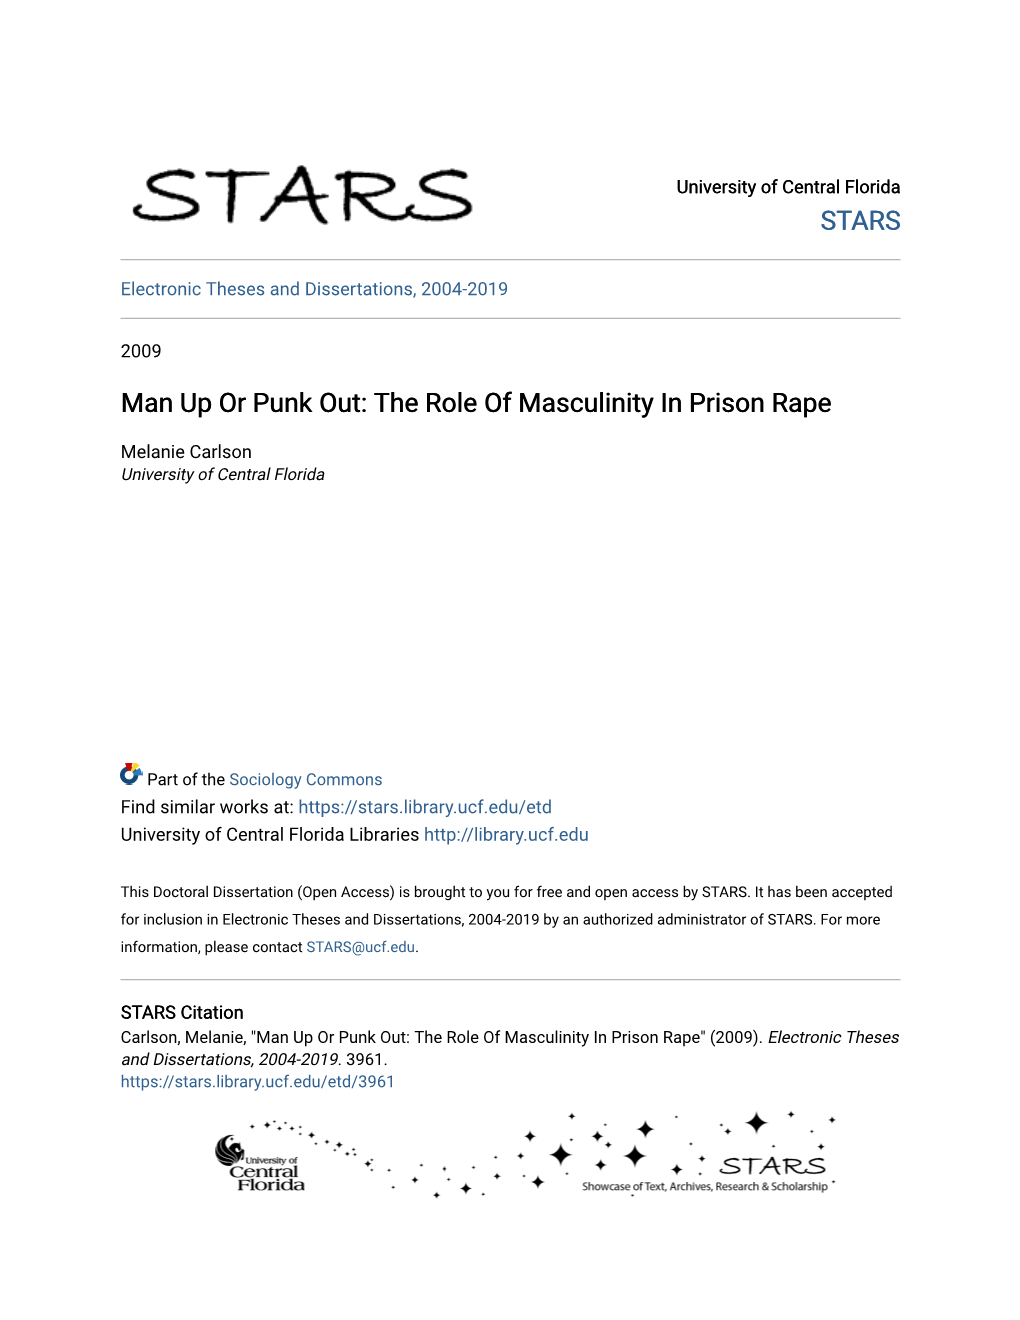 Man up Or Punk Out: the Role of Masculinity in Prison Rape